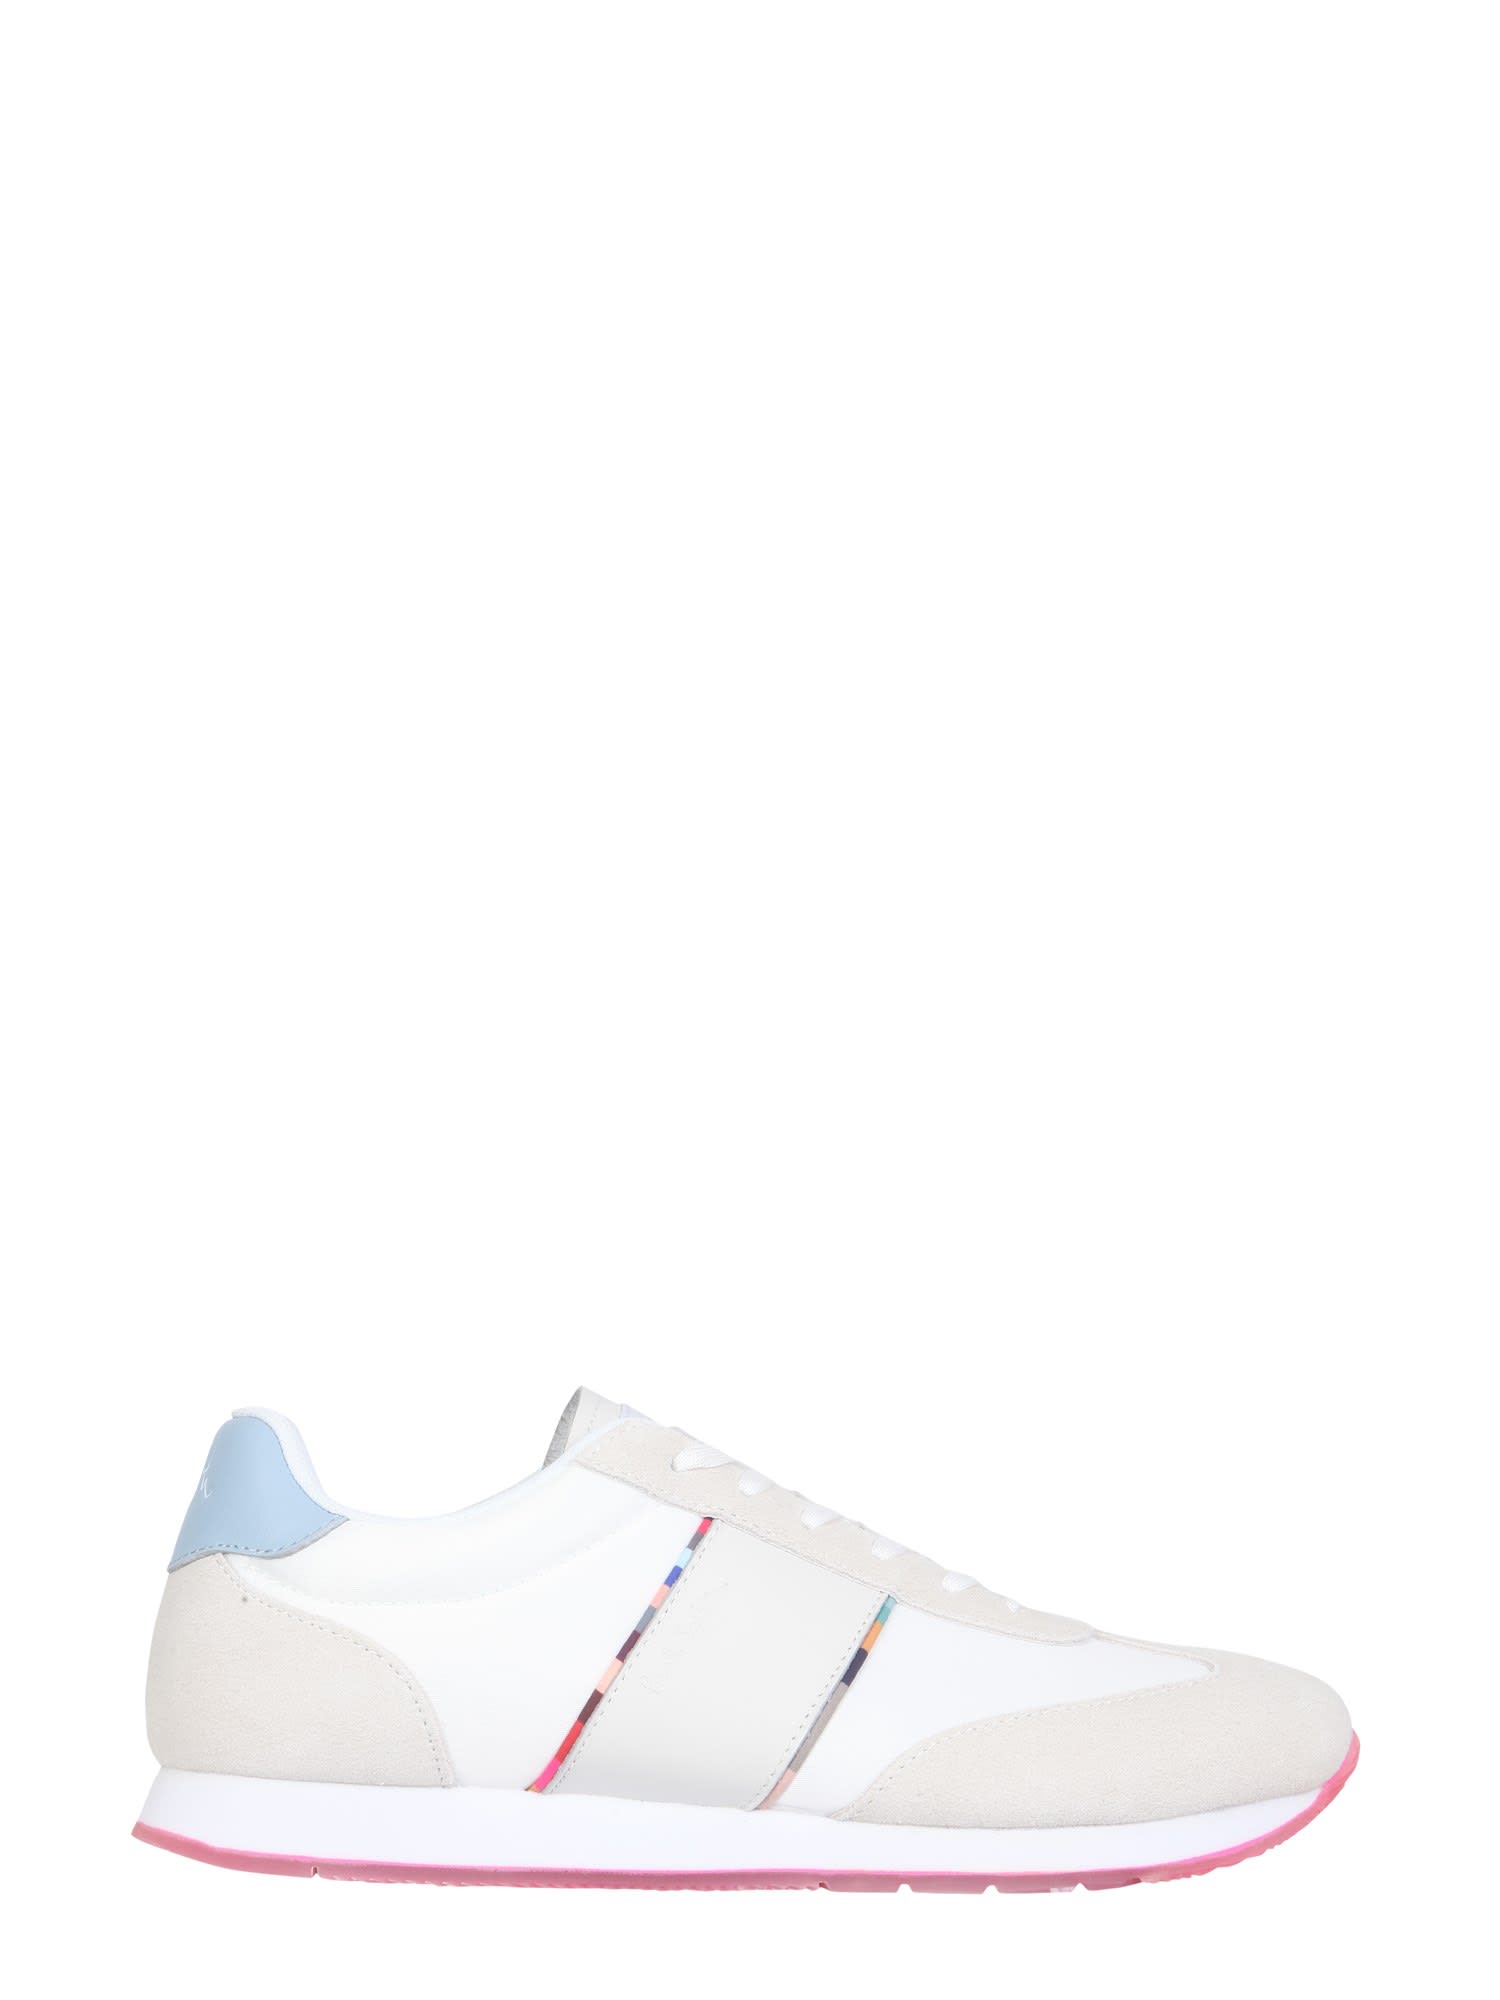 Paul Smith Booker Sneakers